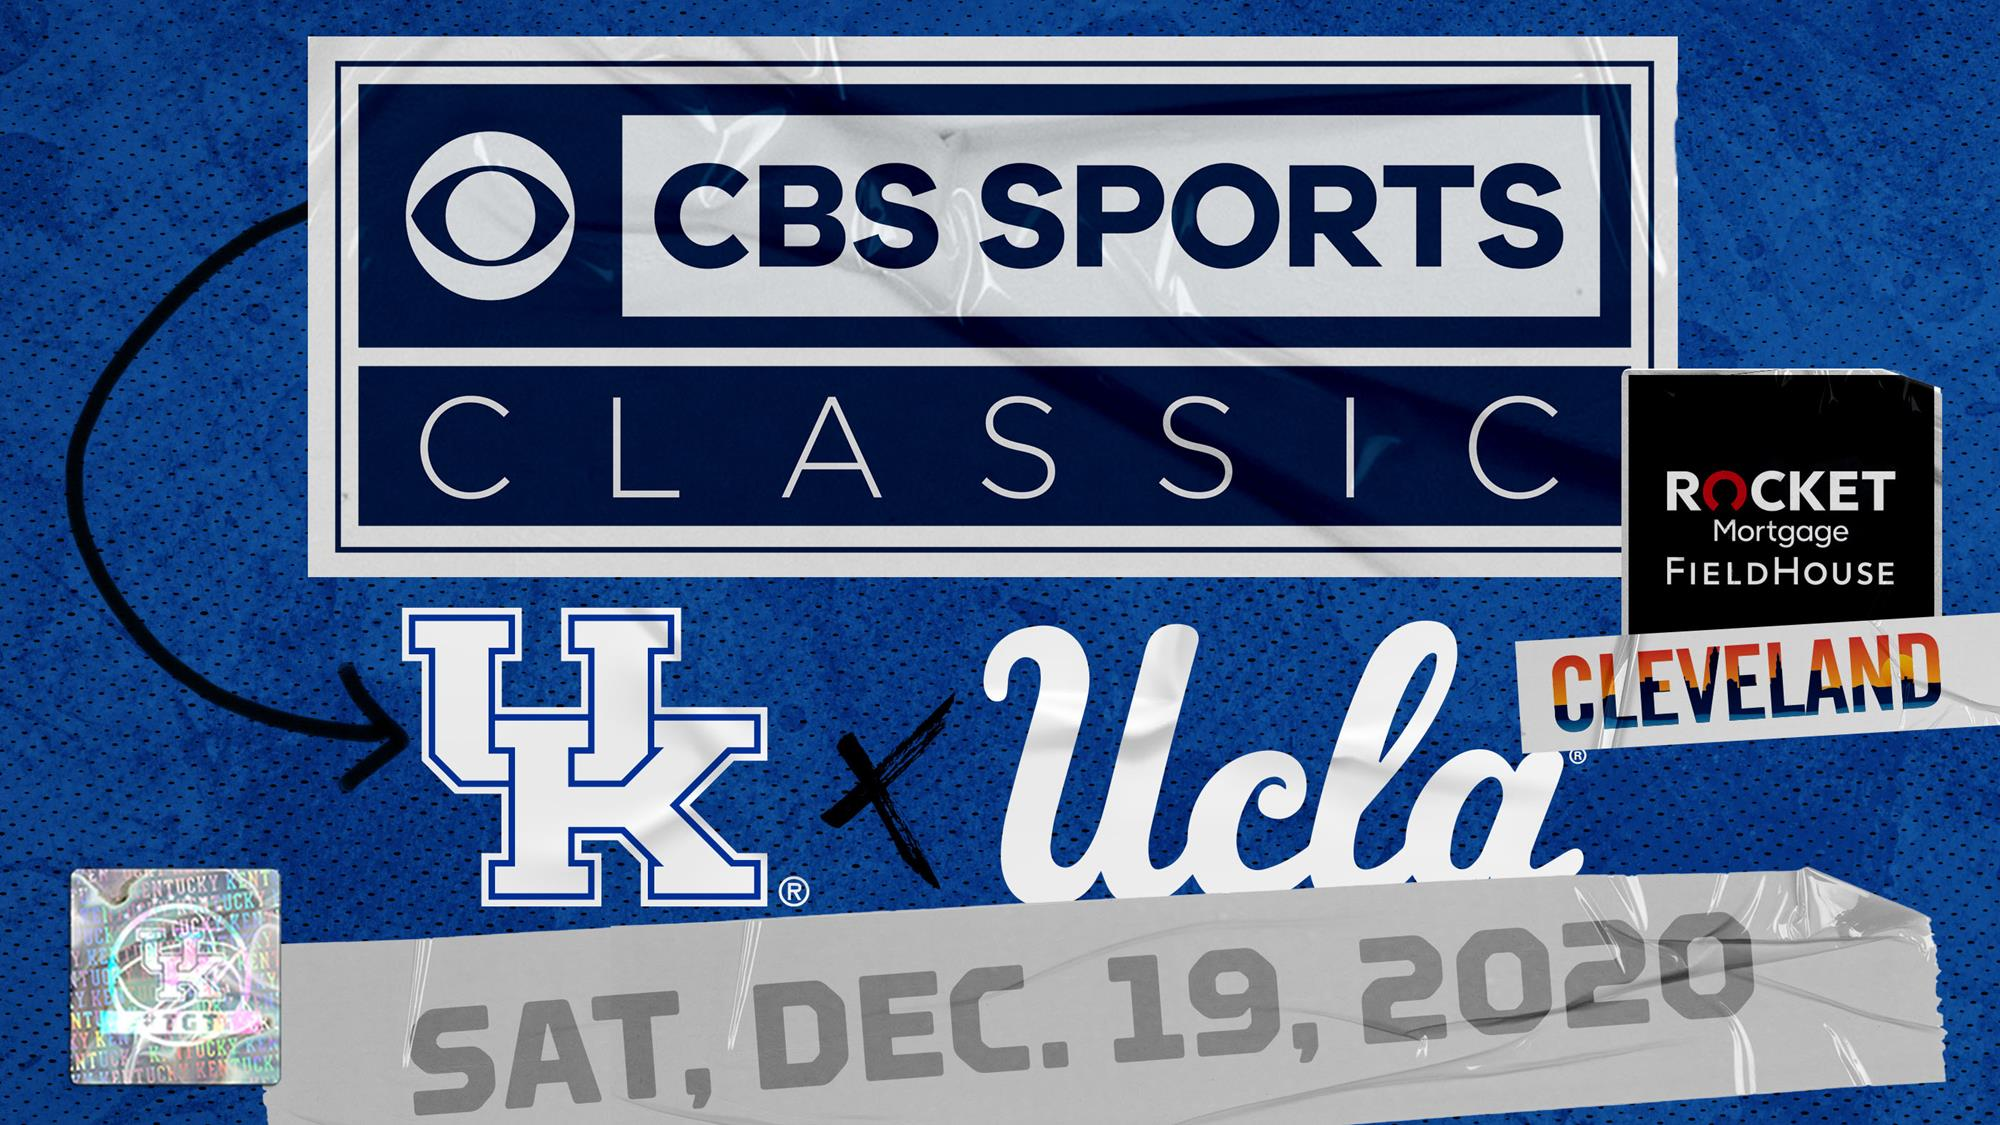 Wildcats’ CBS Sports Classic Matchup vs. UCLA Slated for Cleveland